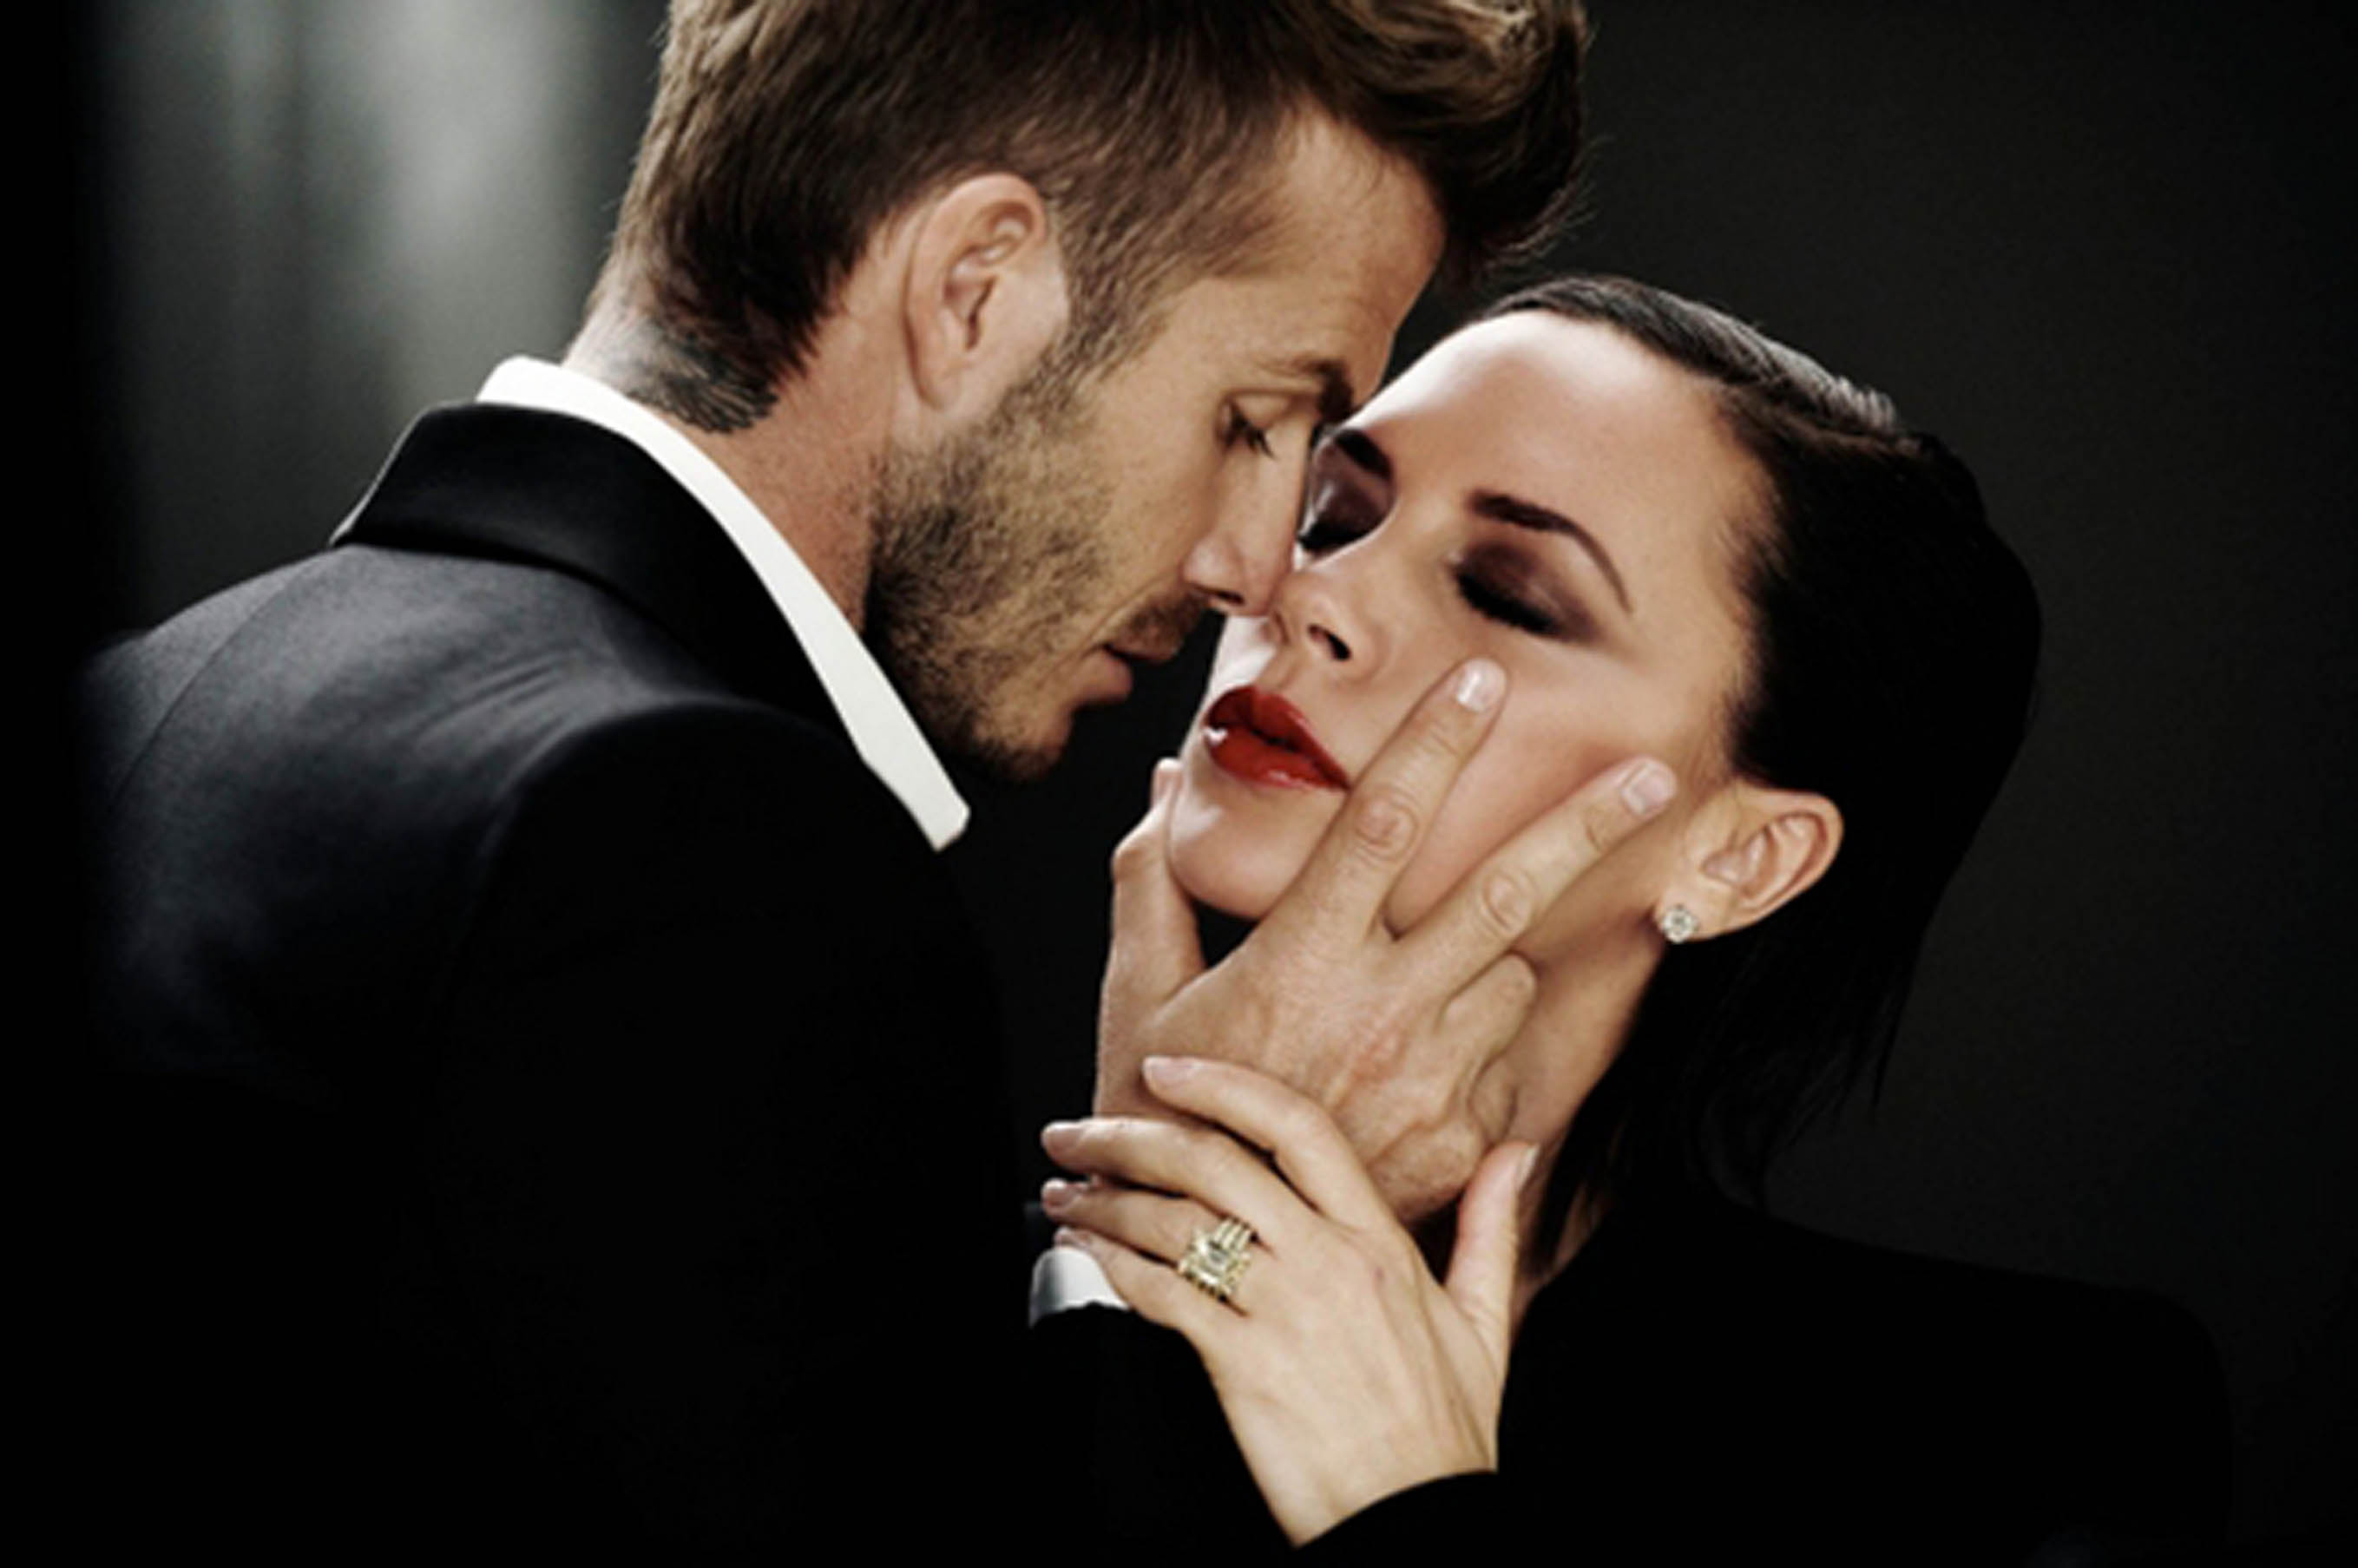 2010 saw the pair in steamy scenes for an Intimately Yours fragrance advert